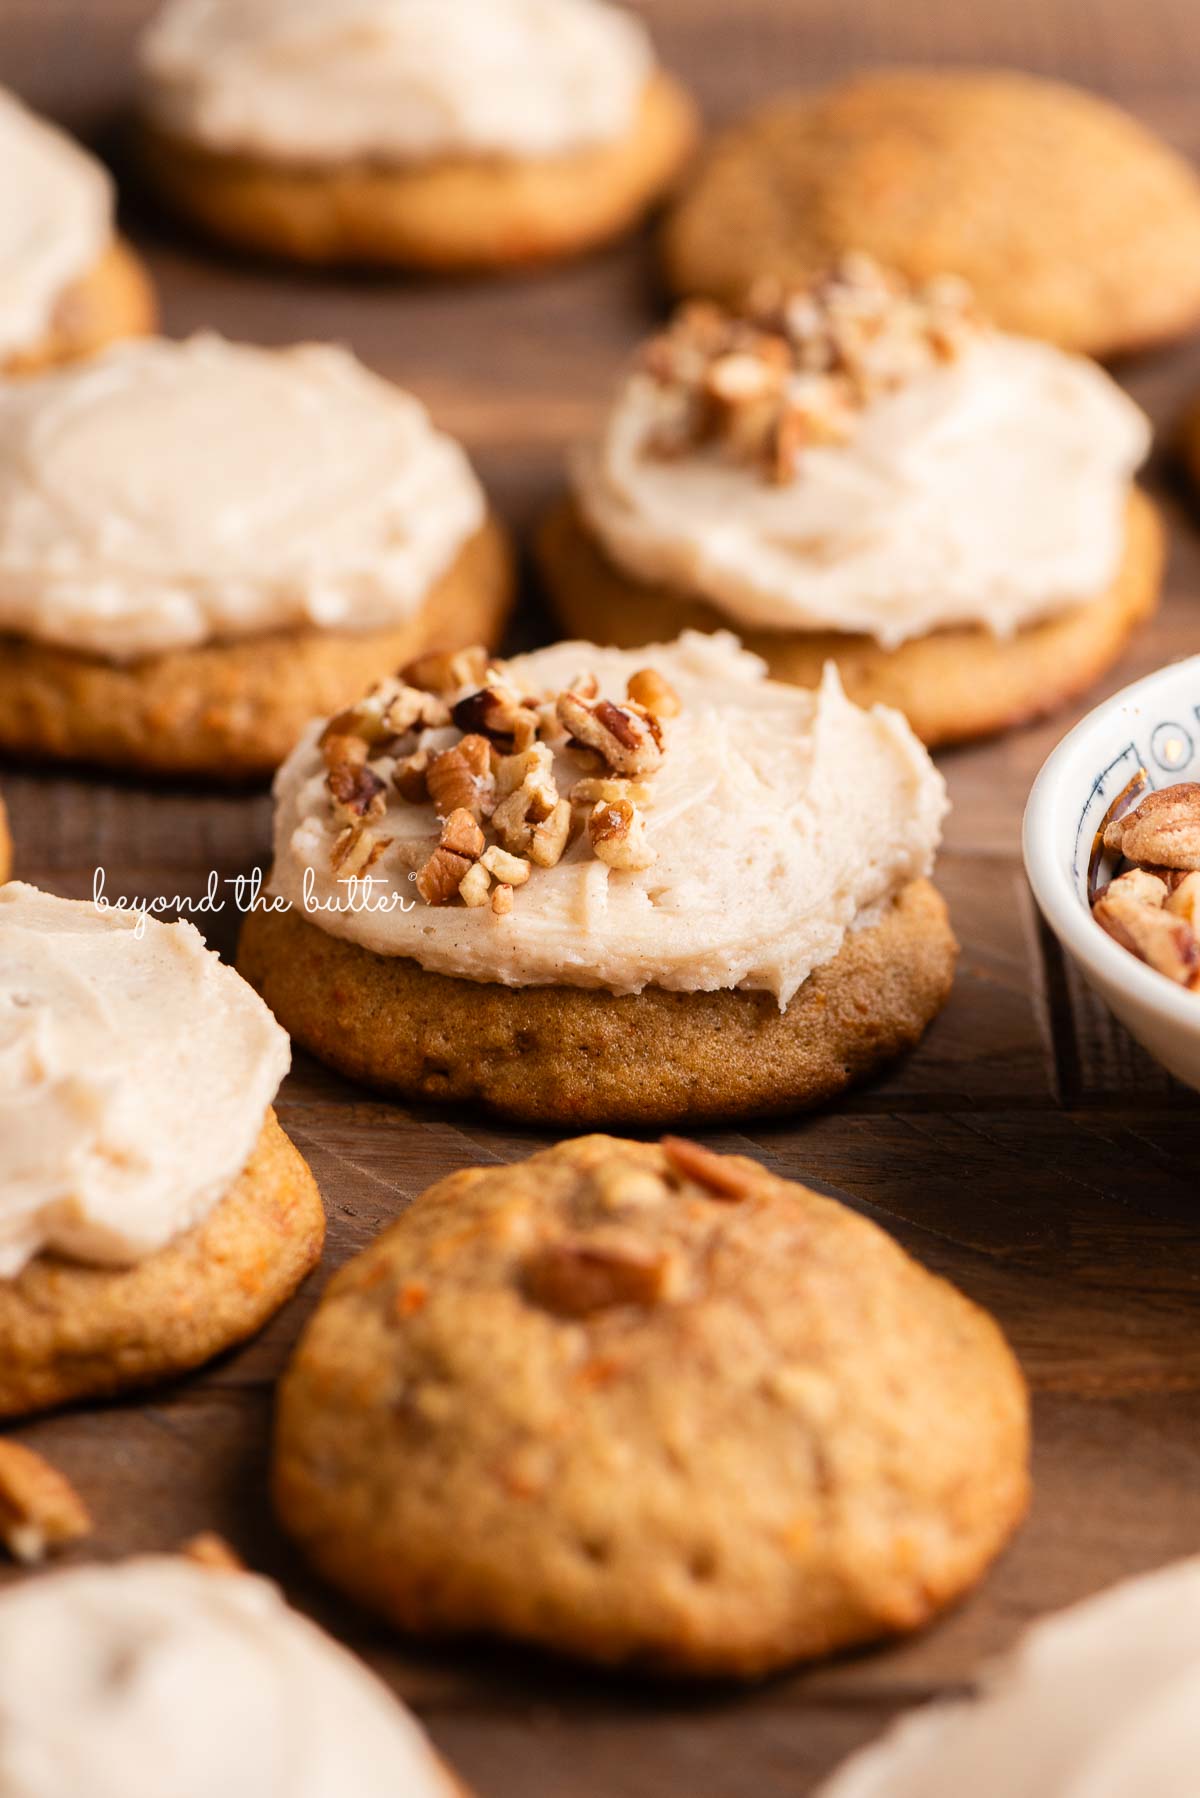 Carrot cake cookies frosted with brown butter cream cheese frosting and some topped with chopped pecans with a small bowl filled with chopped pecans to the side on a dark wood background.